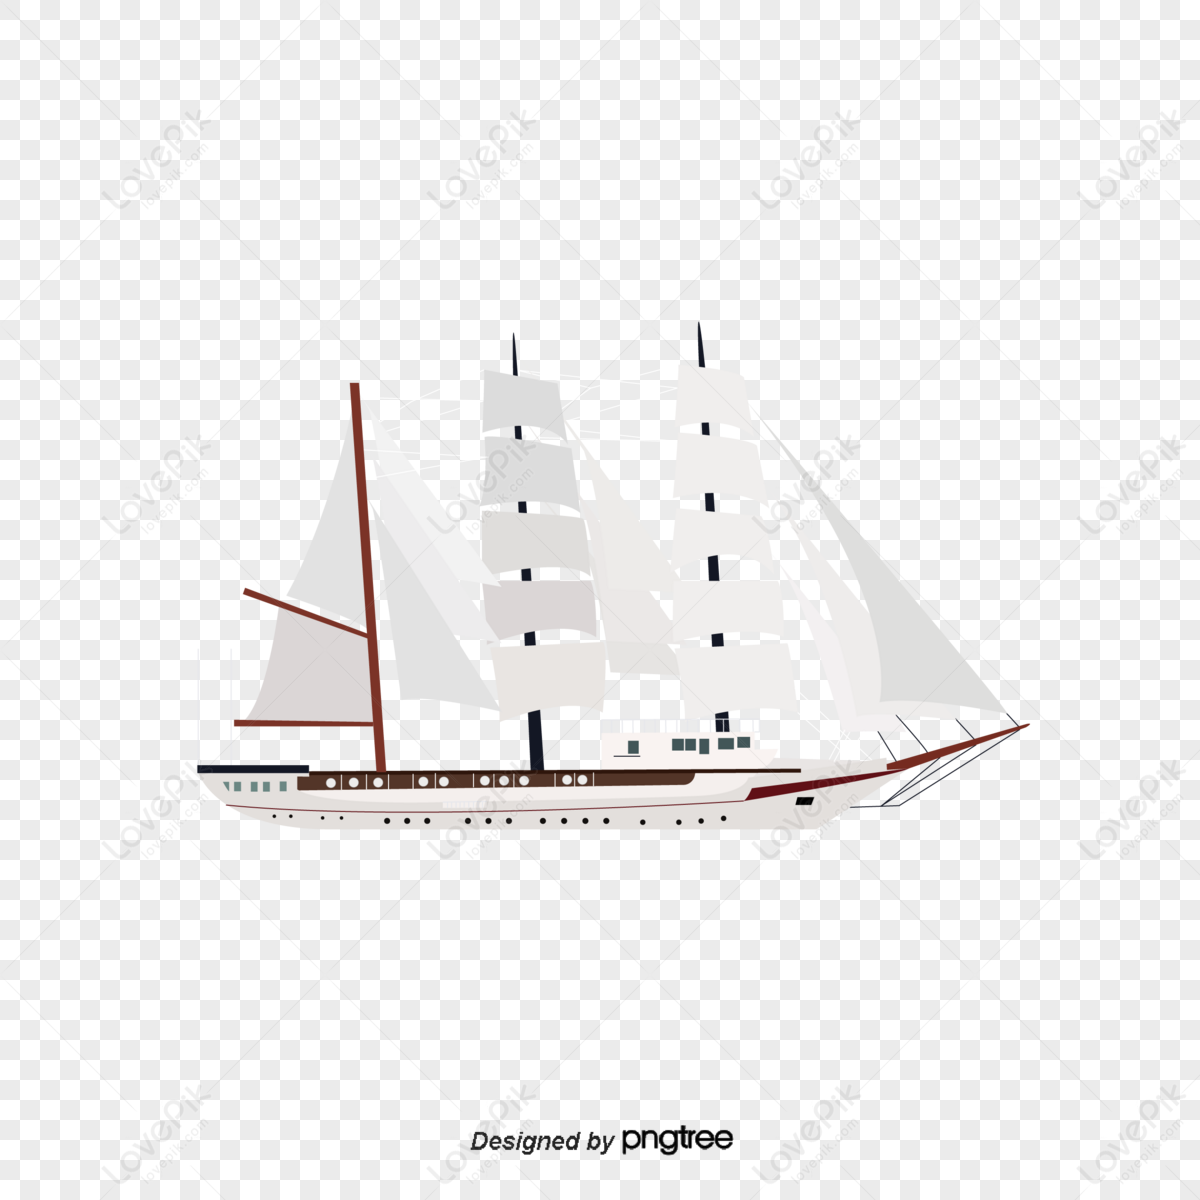 Cartoon-style large sailboat,ocean shipping,means of transport,illustration png image